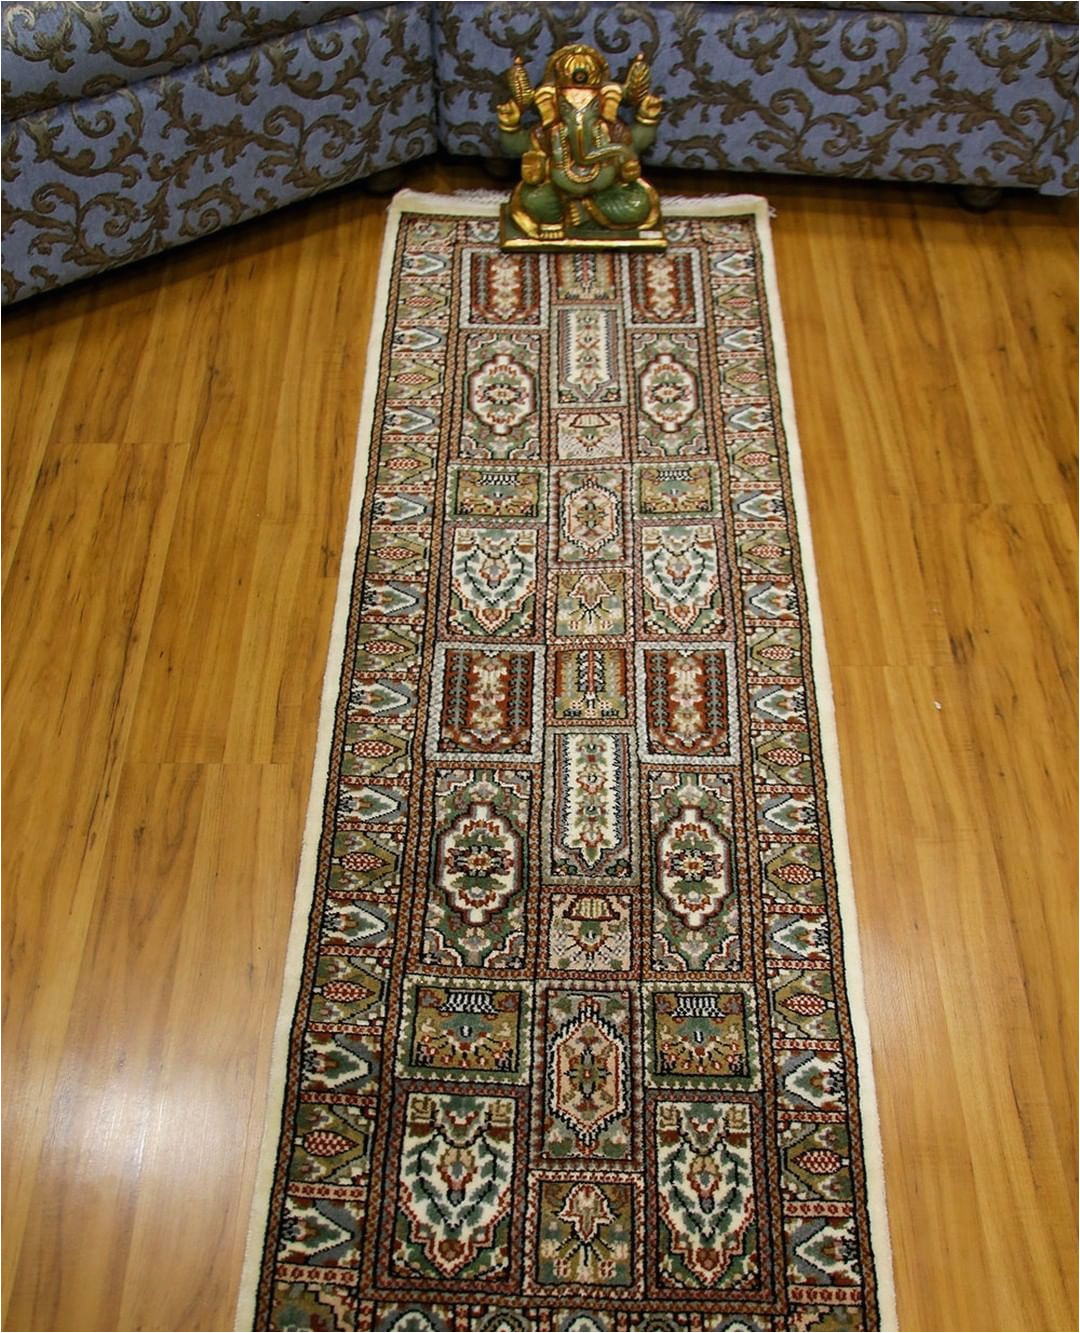 largest selection of area rugs near me